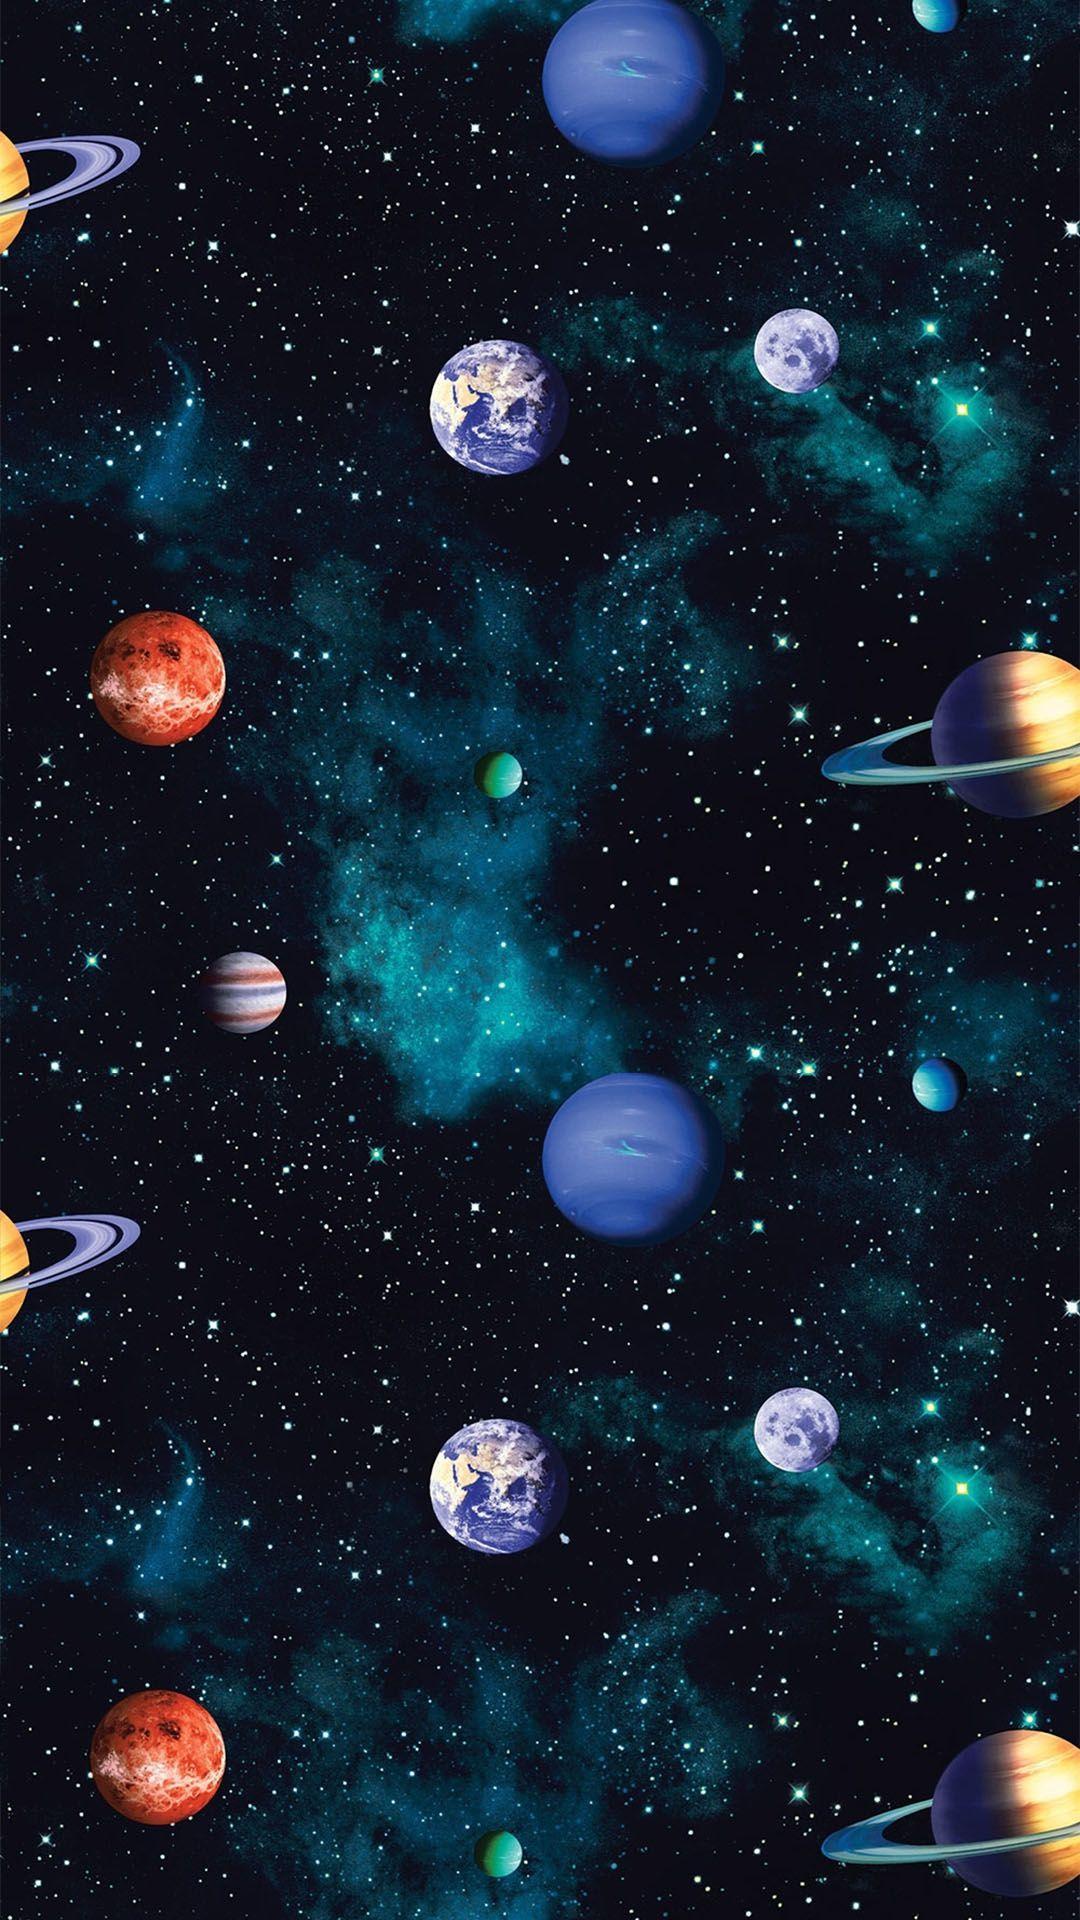 The Cosmos Space Wallpapers by I Love Wallpaper. Ideal for a bedroom